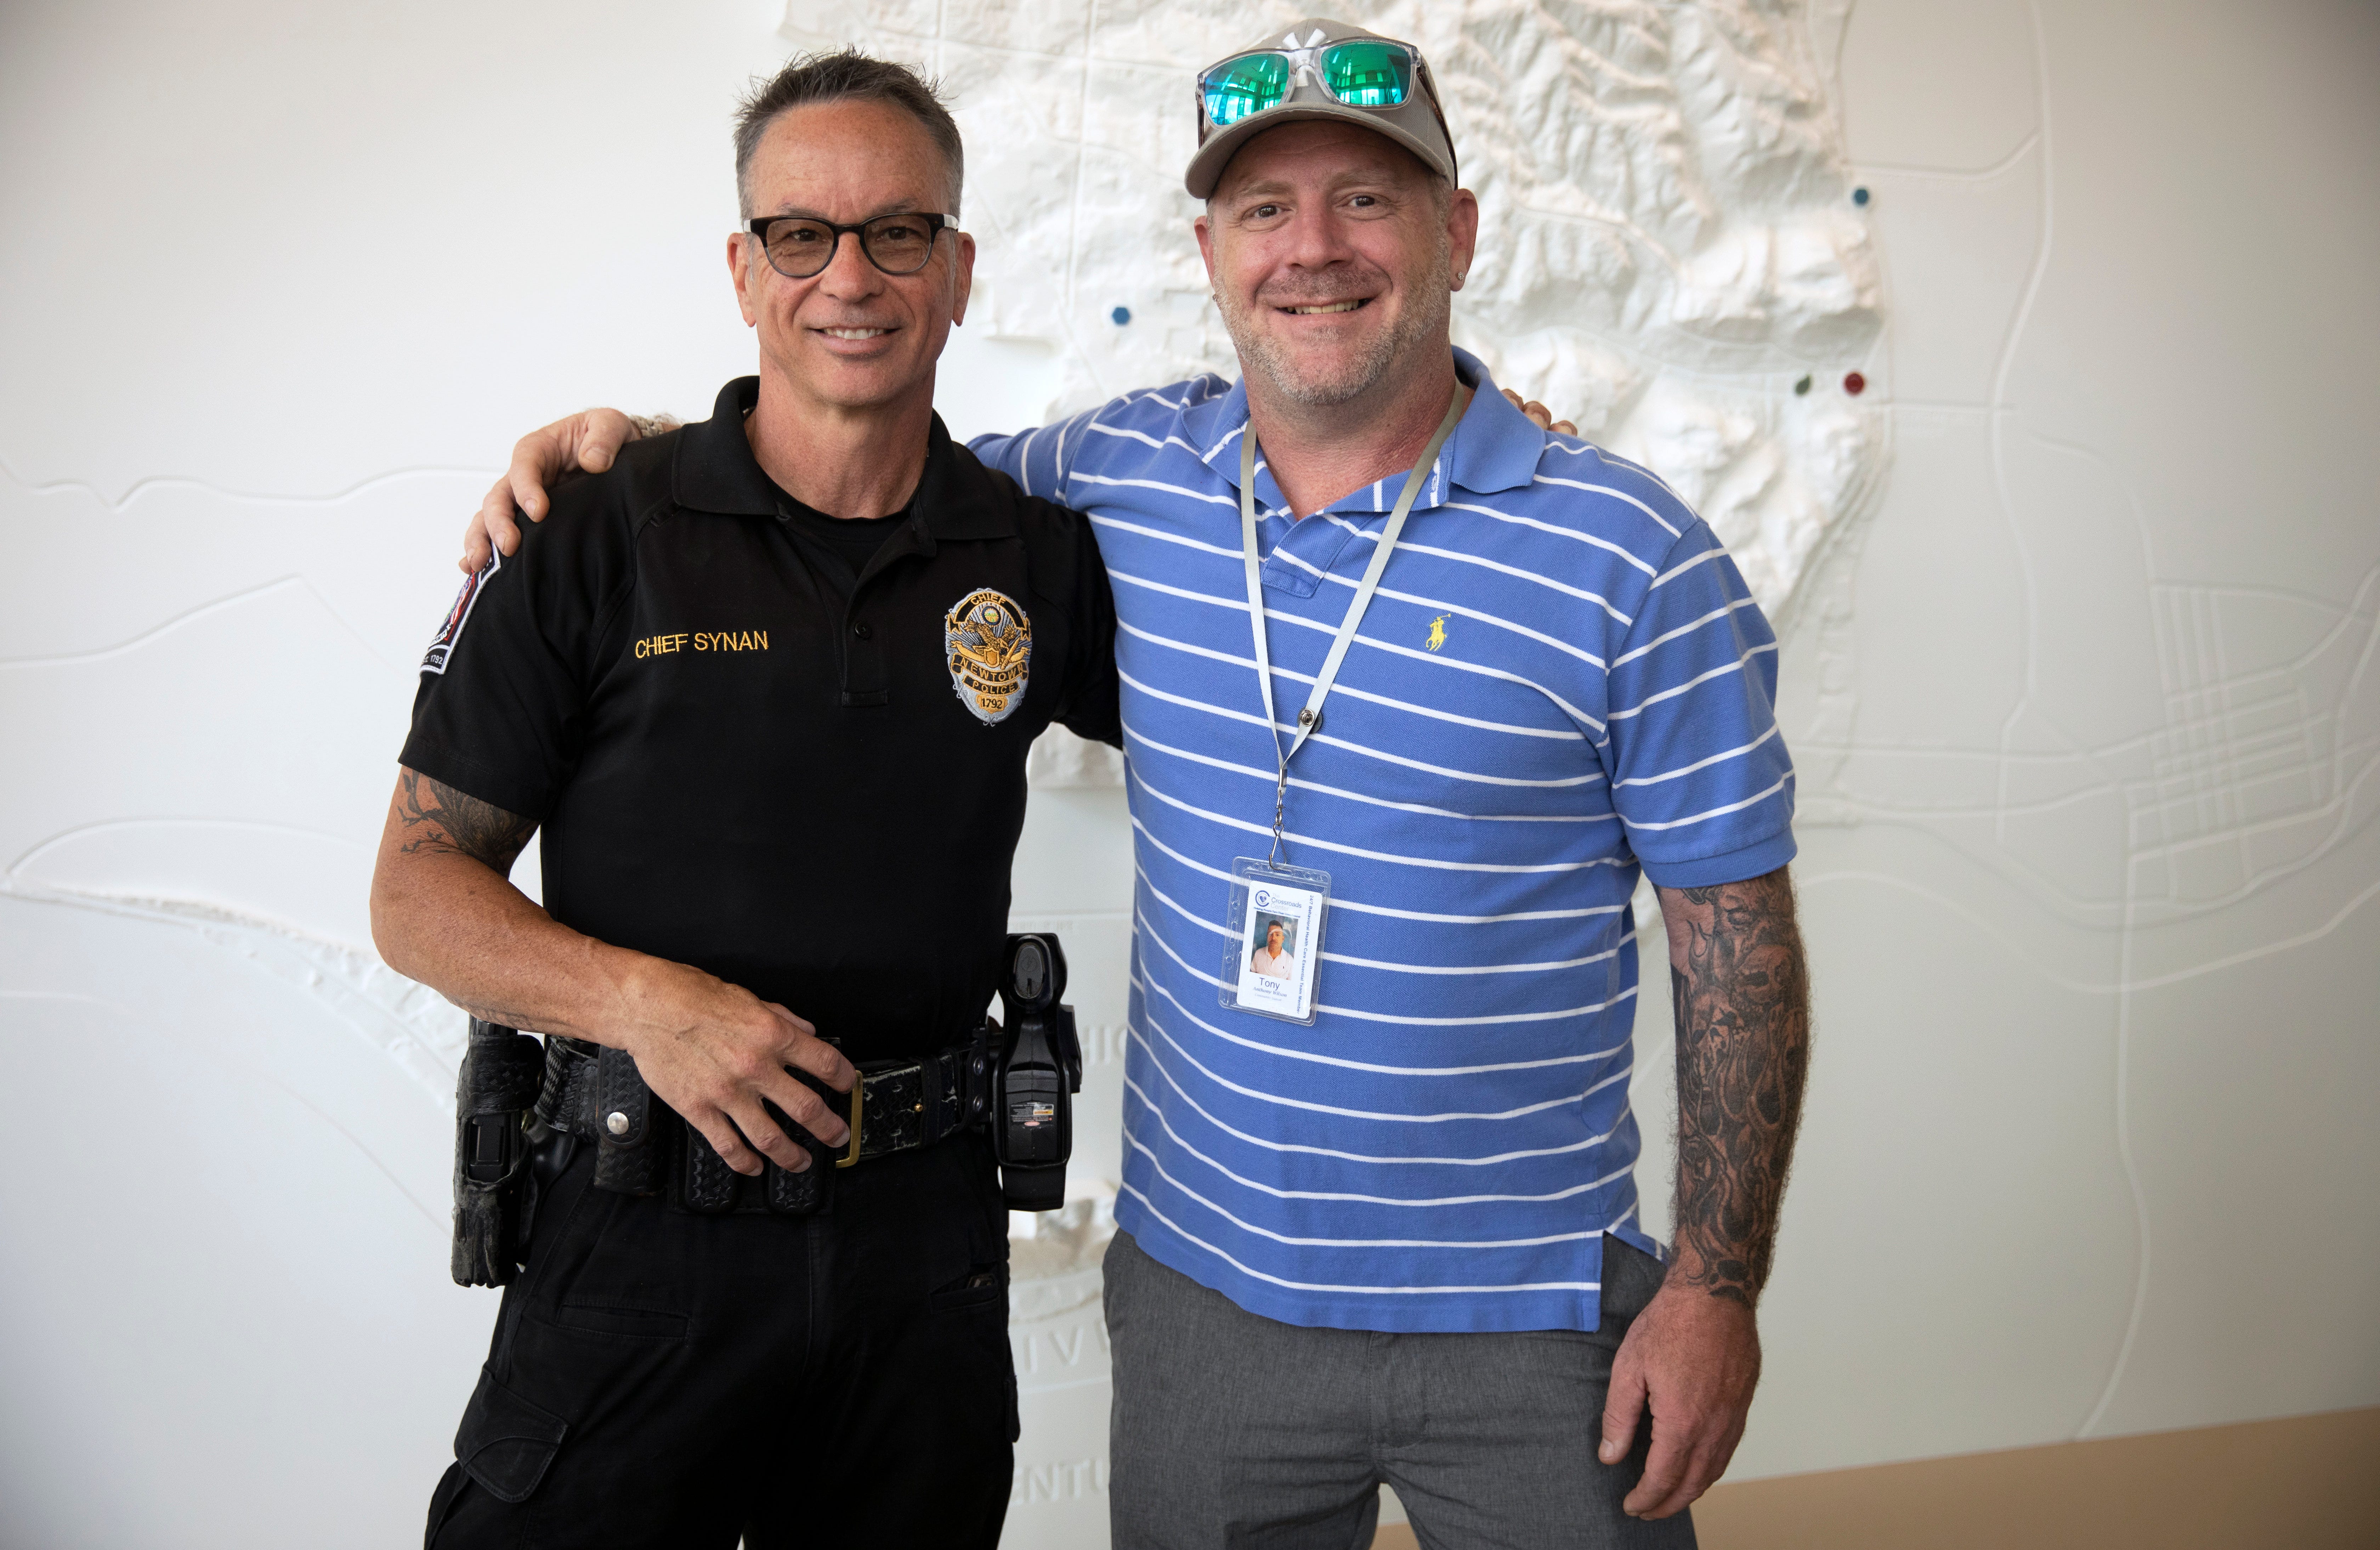 Tom Synan, Newtown police chief, and Tony Wilson, outreach worker, have successfully offered wrap-around services to individuals in high-crime, high-overdose spots in Cincinnati.